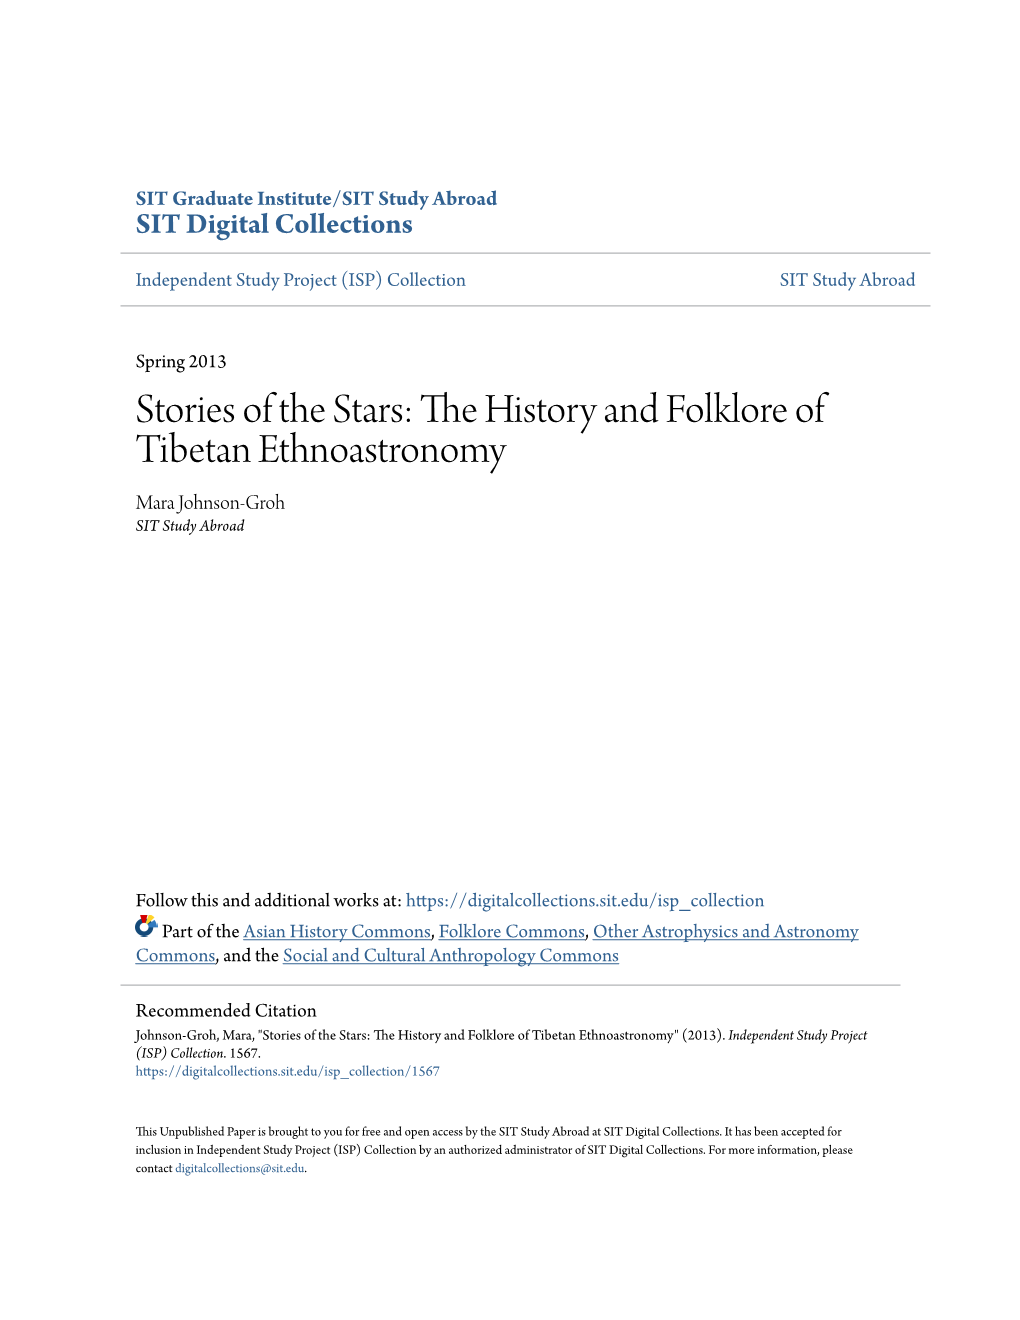 Stories of the Stars: the History and Folklore of Tibetan Ethnoastronomy